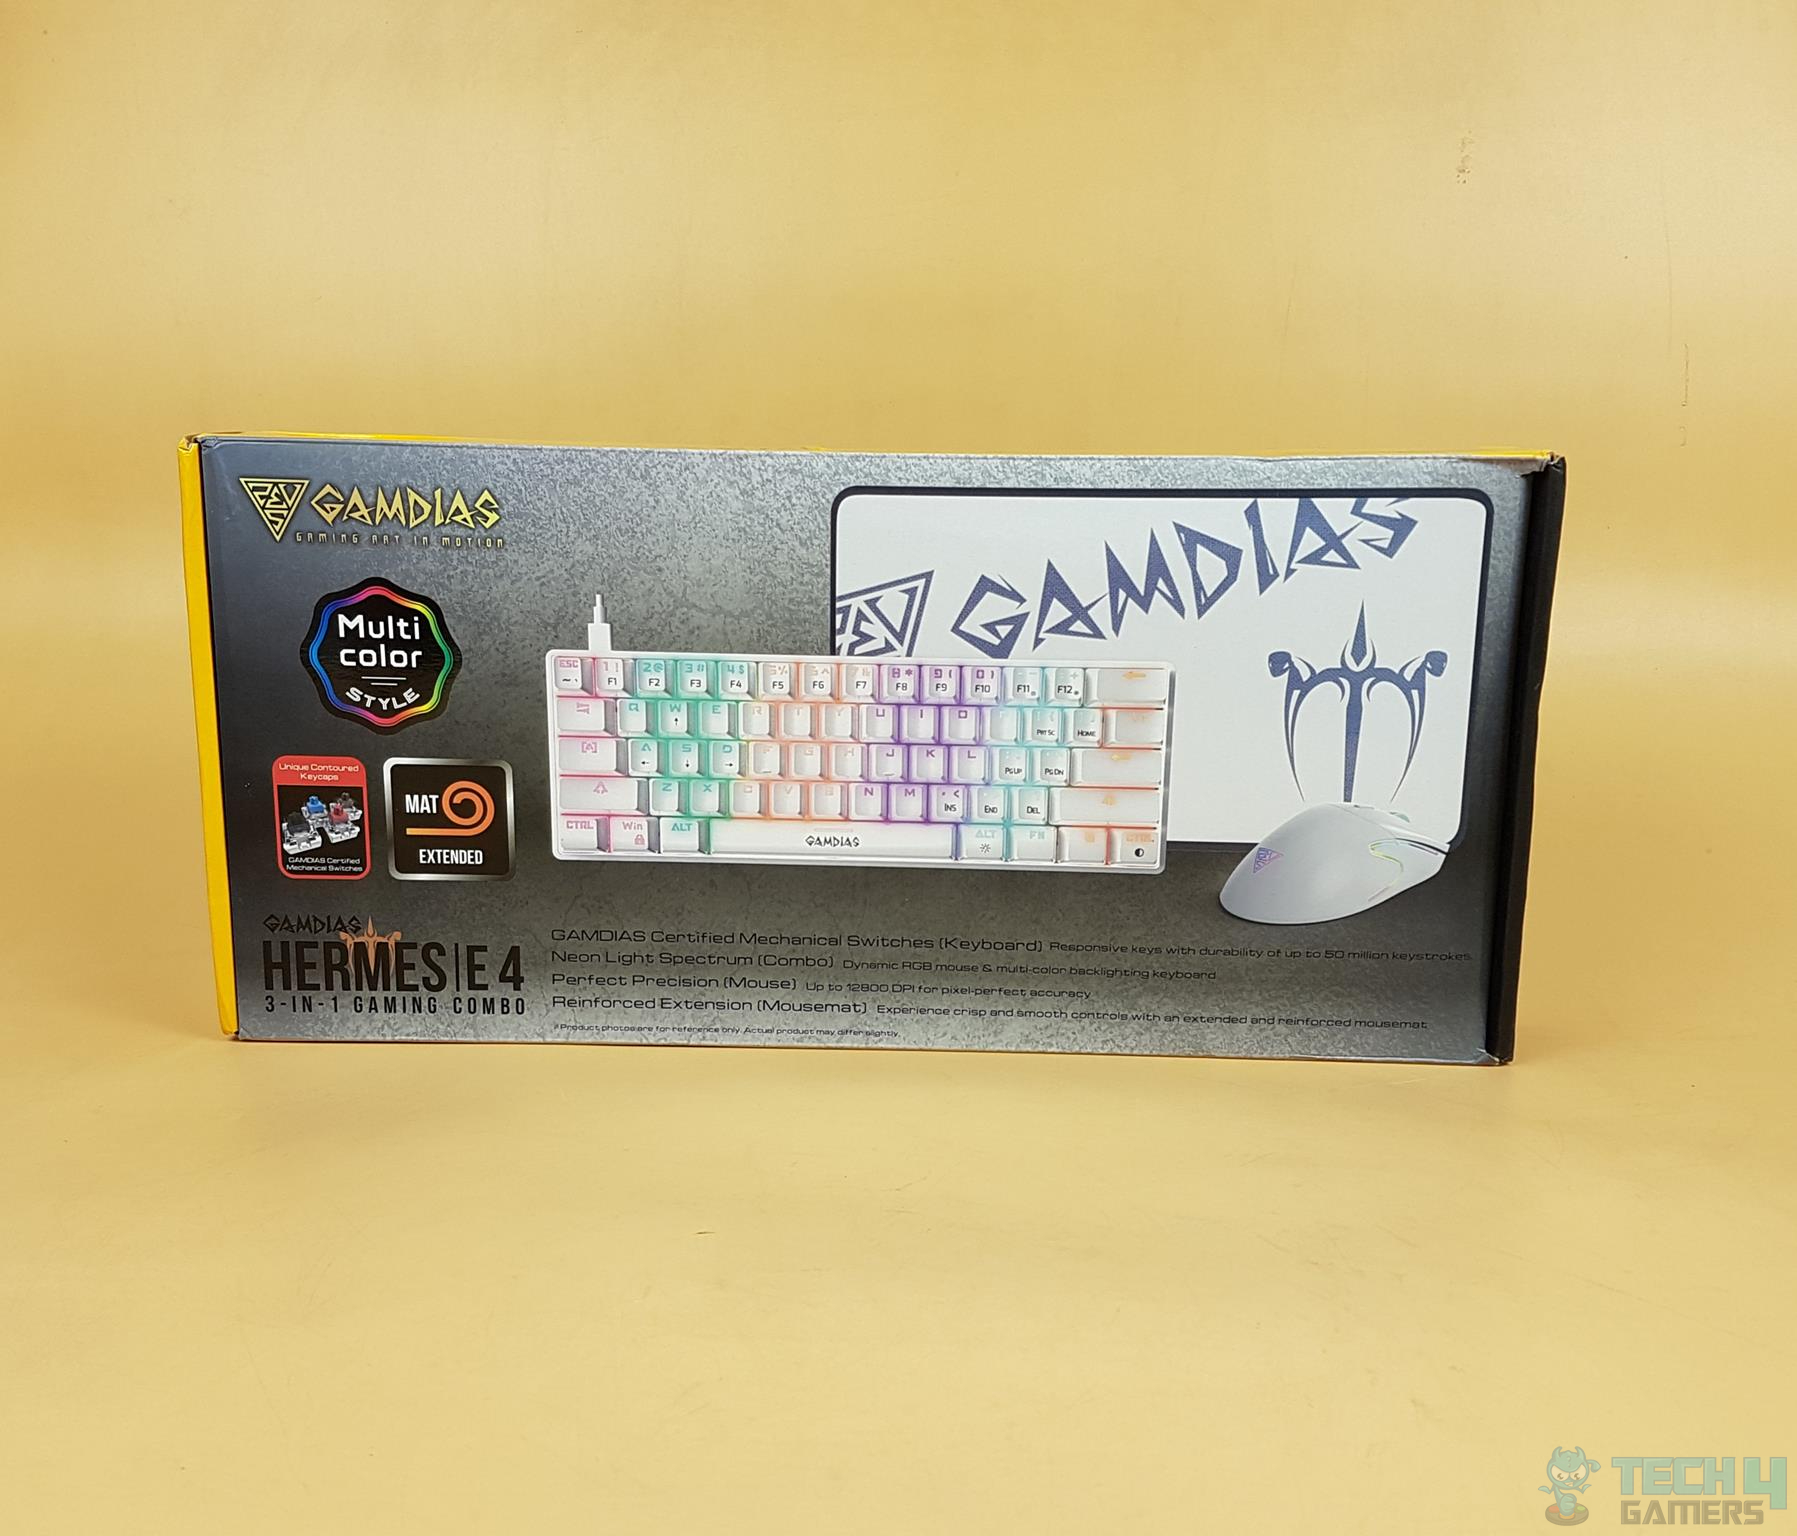 GAMDIAS’ Mouse, Mousepad, and Keyboard’s 3-IN-1 box aesthetic.